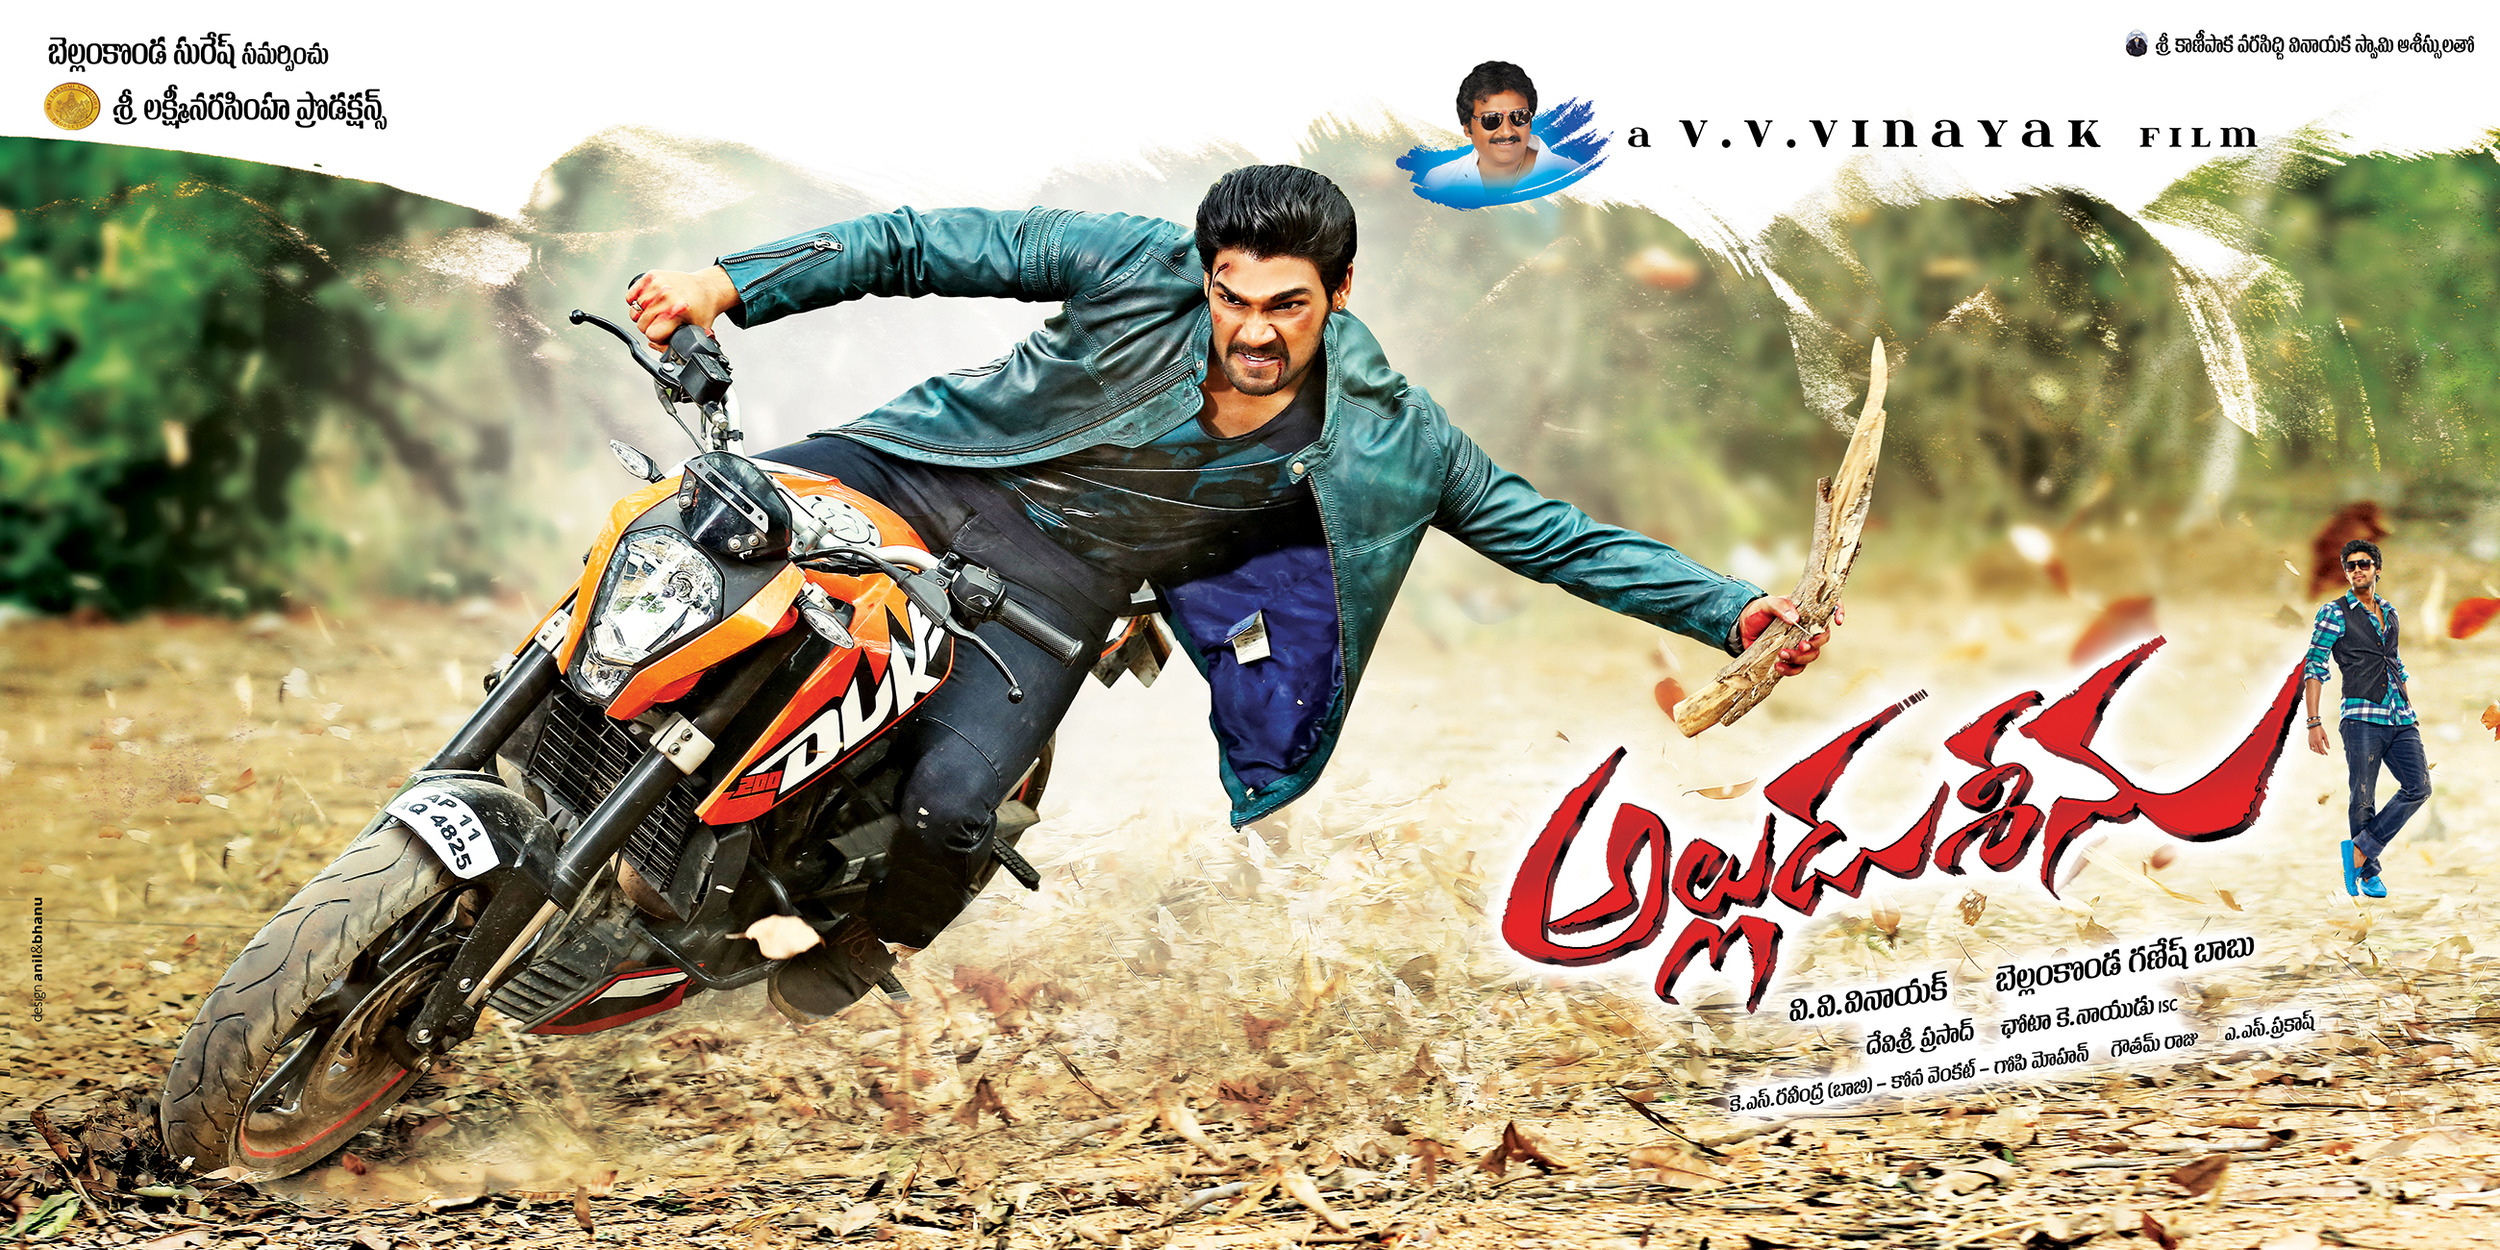 Mega Sized Movie Poster Image for Alludu Seenu (#4 of 9)